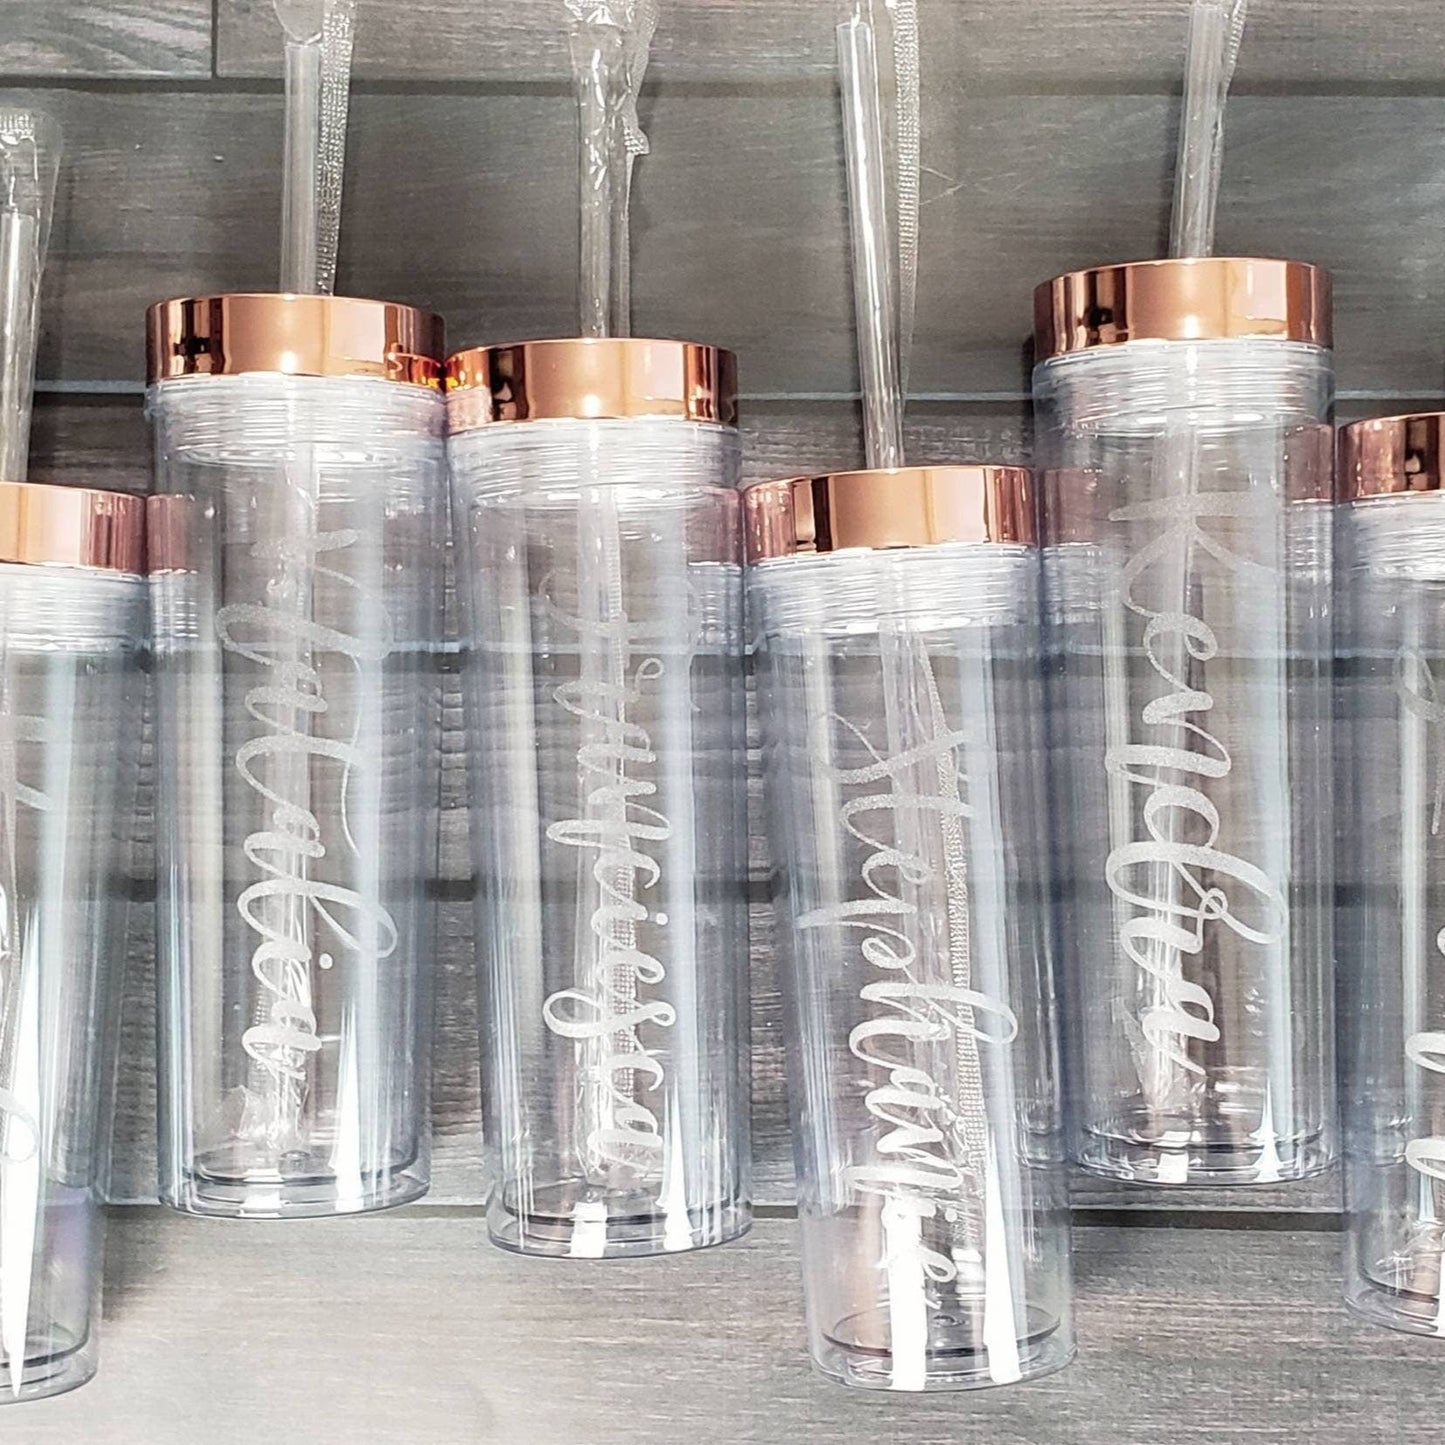 Bridal Party Handwritten Names Engraved on Skinny Clear Acrylic Tumbler - NEW TOP COLORS - Free Personalization Candy Wrappers Candy Wrapper Store